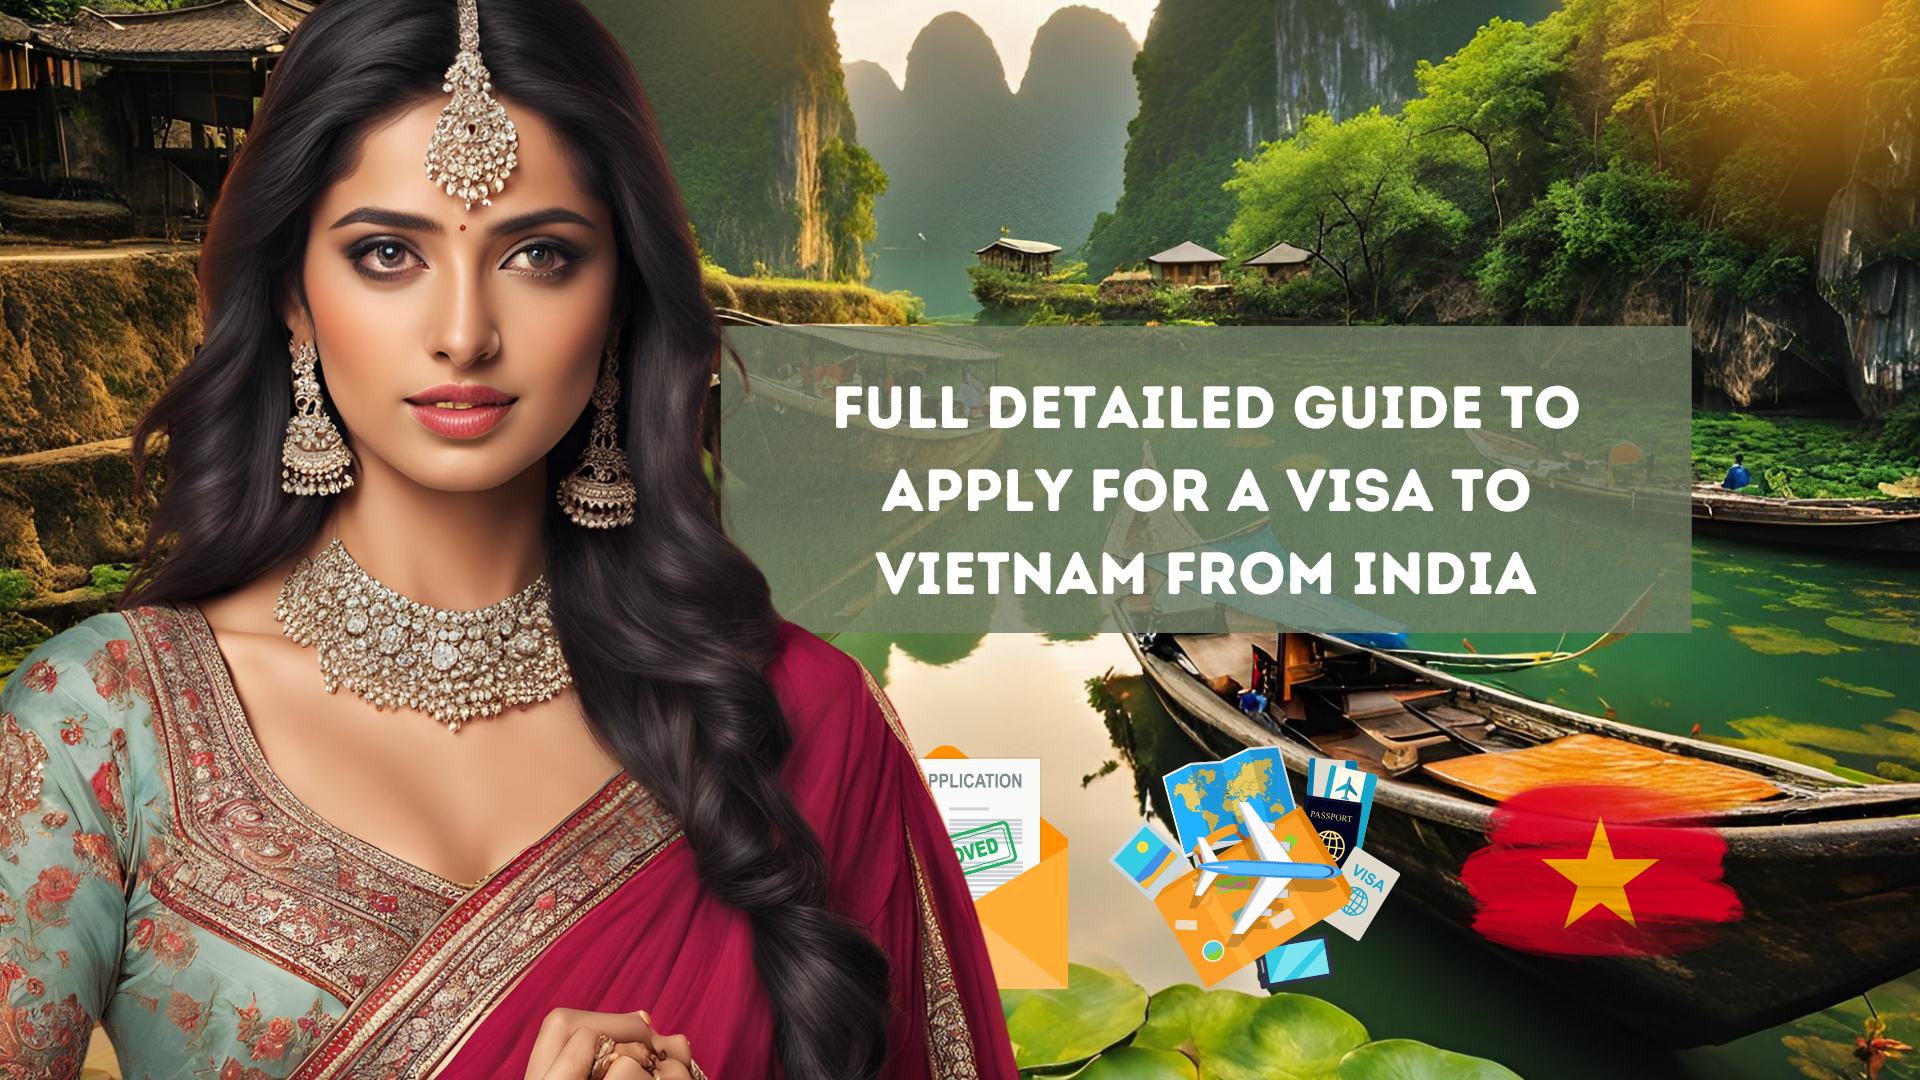 Full Detailed Guide to Apply for a Visa to Vietnam from India